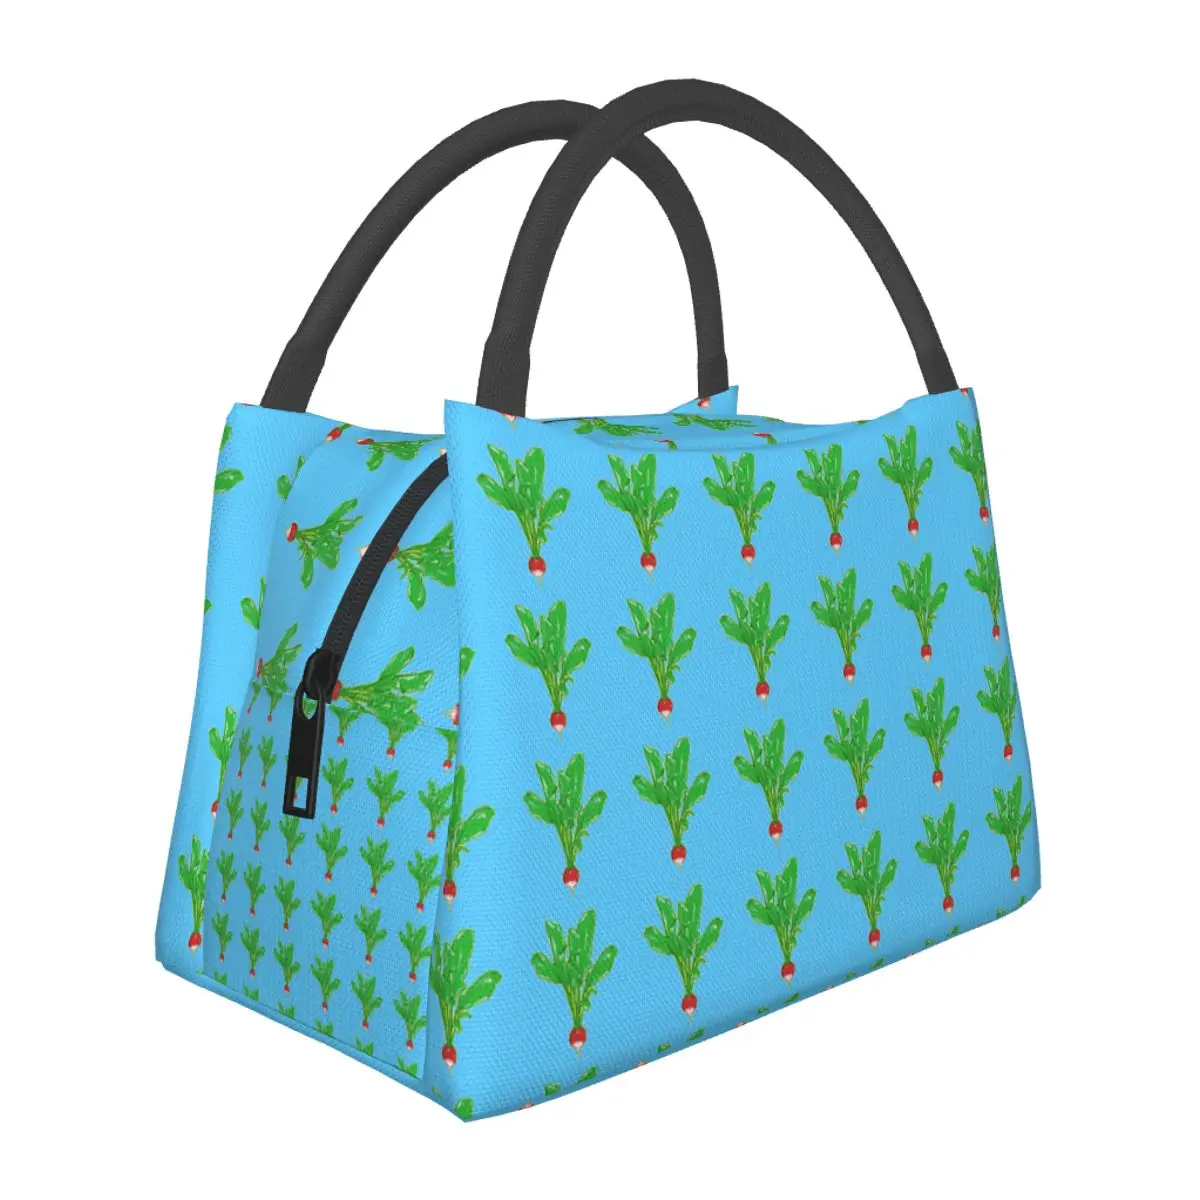 

Radishes Lunch Bag Vegetable Print Fashion Lunch Box Travel Portable Insulated Tote Food Bags For Child Waterproof Cooler Bag